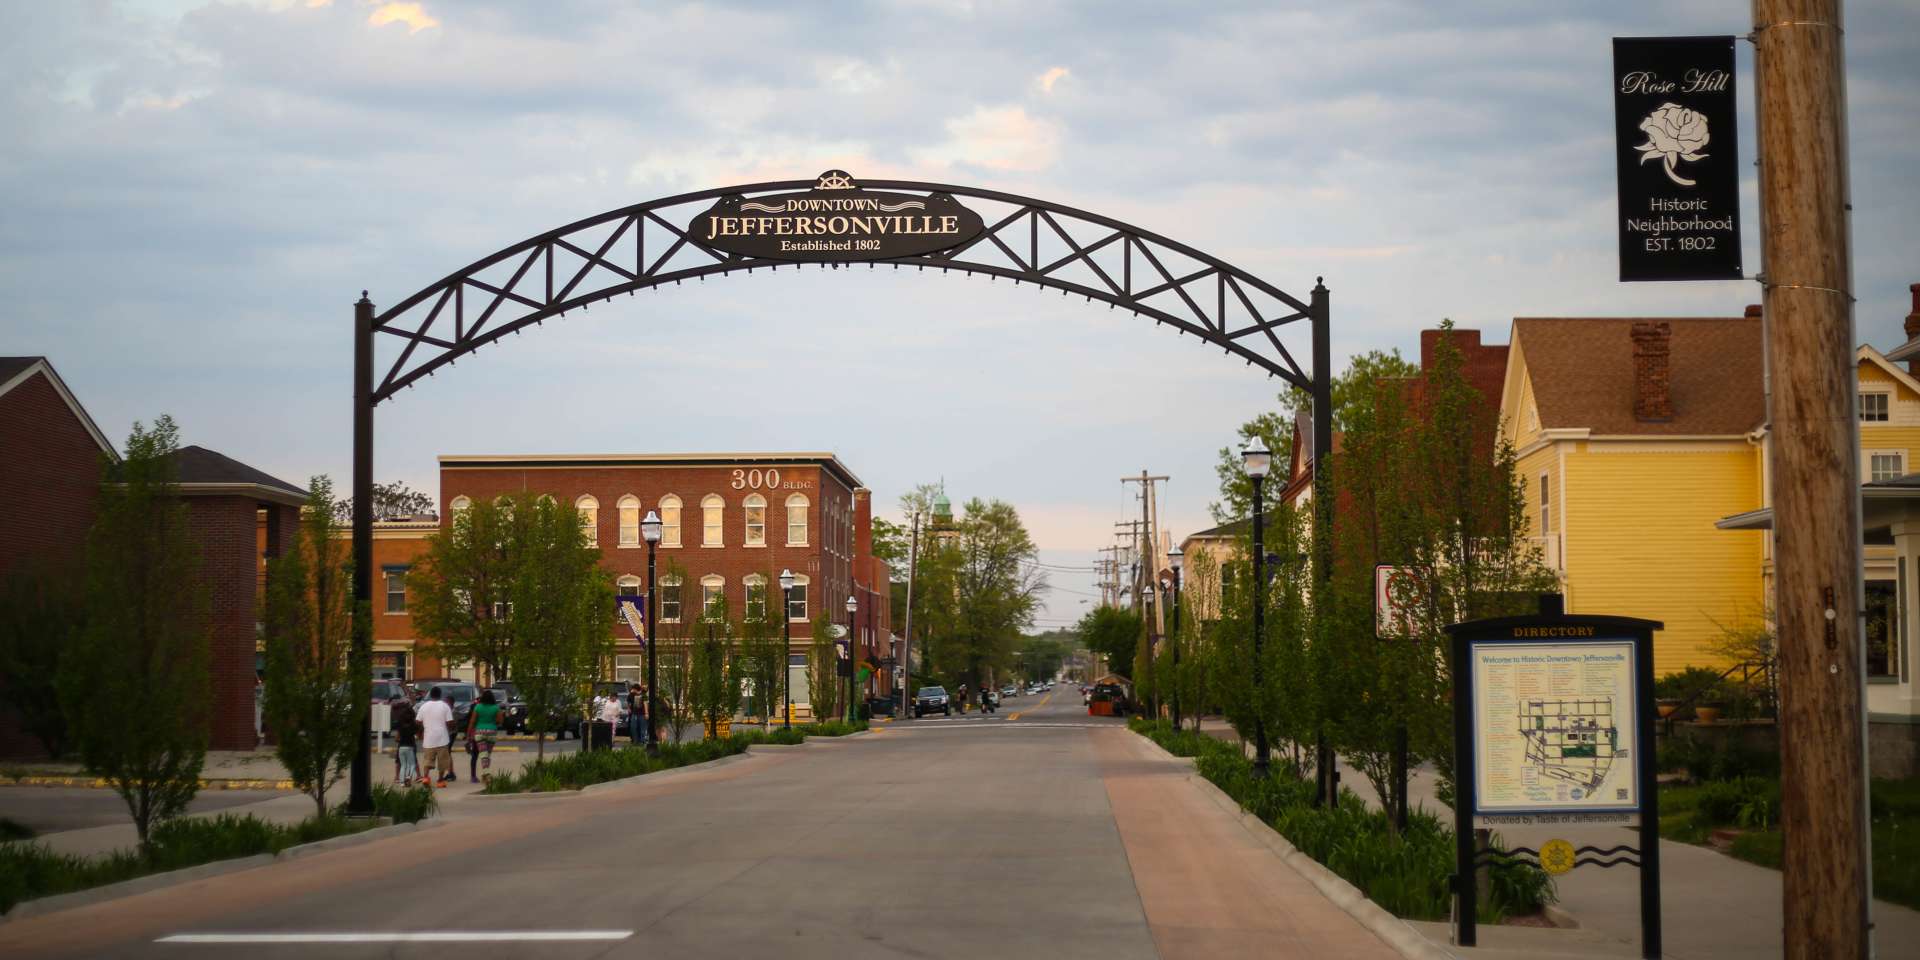 Arch over the street welcoming visitors to Downtown Jeffersonville, IN